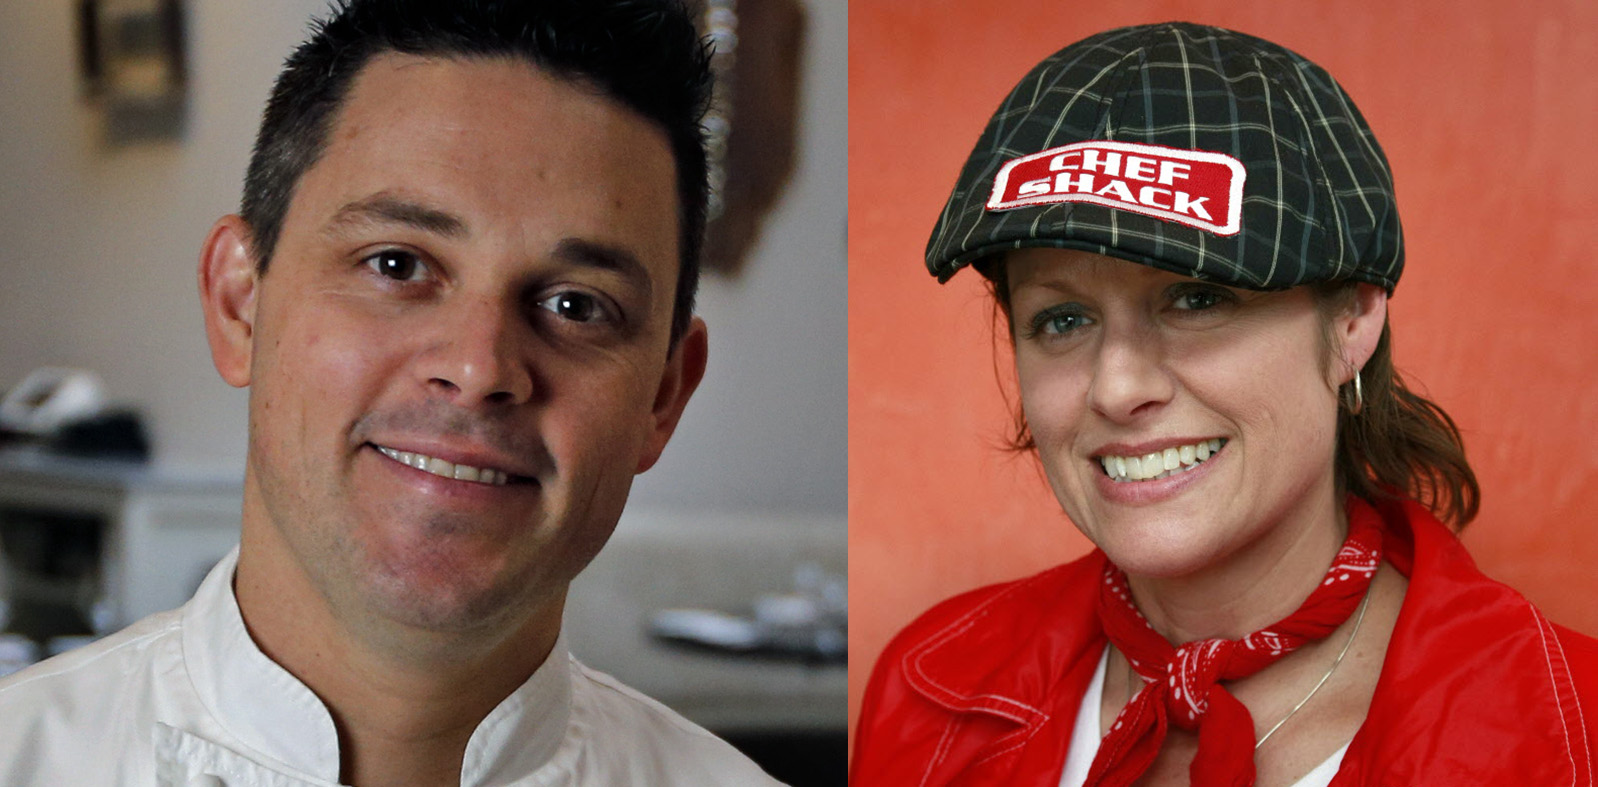 Chef Gavin Kaysen of Spoon and Stable and Carrie Summer of Chef Shack